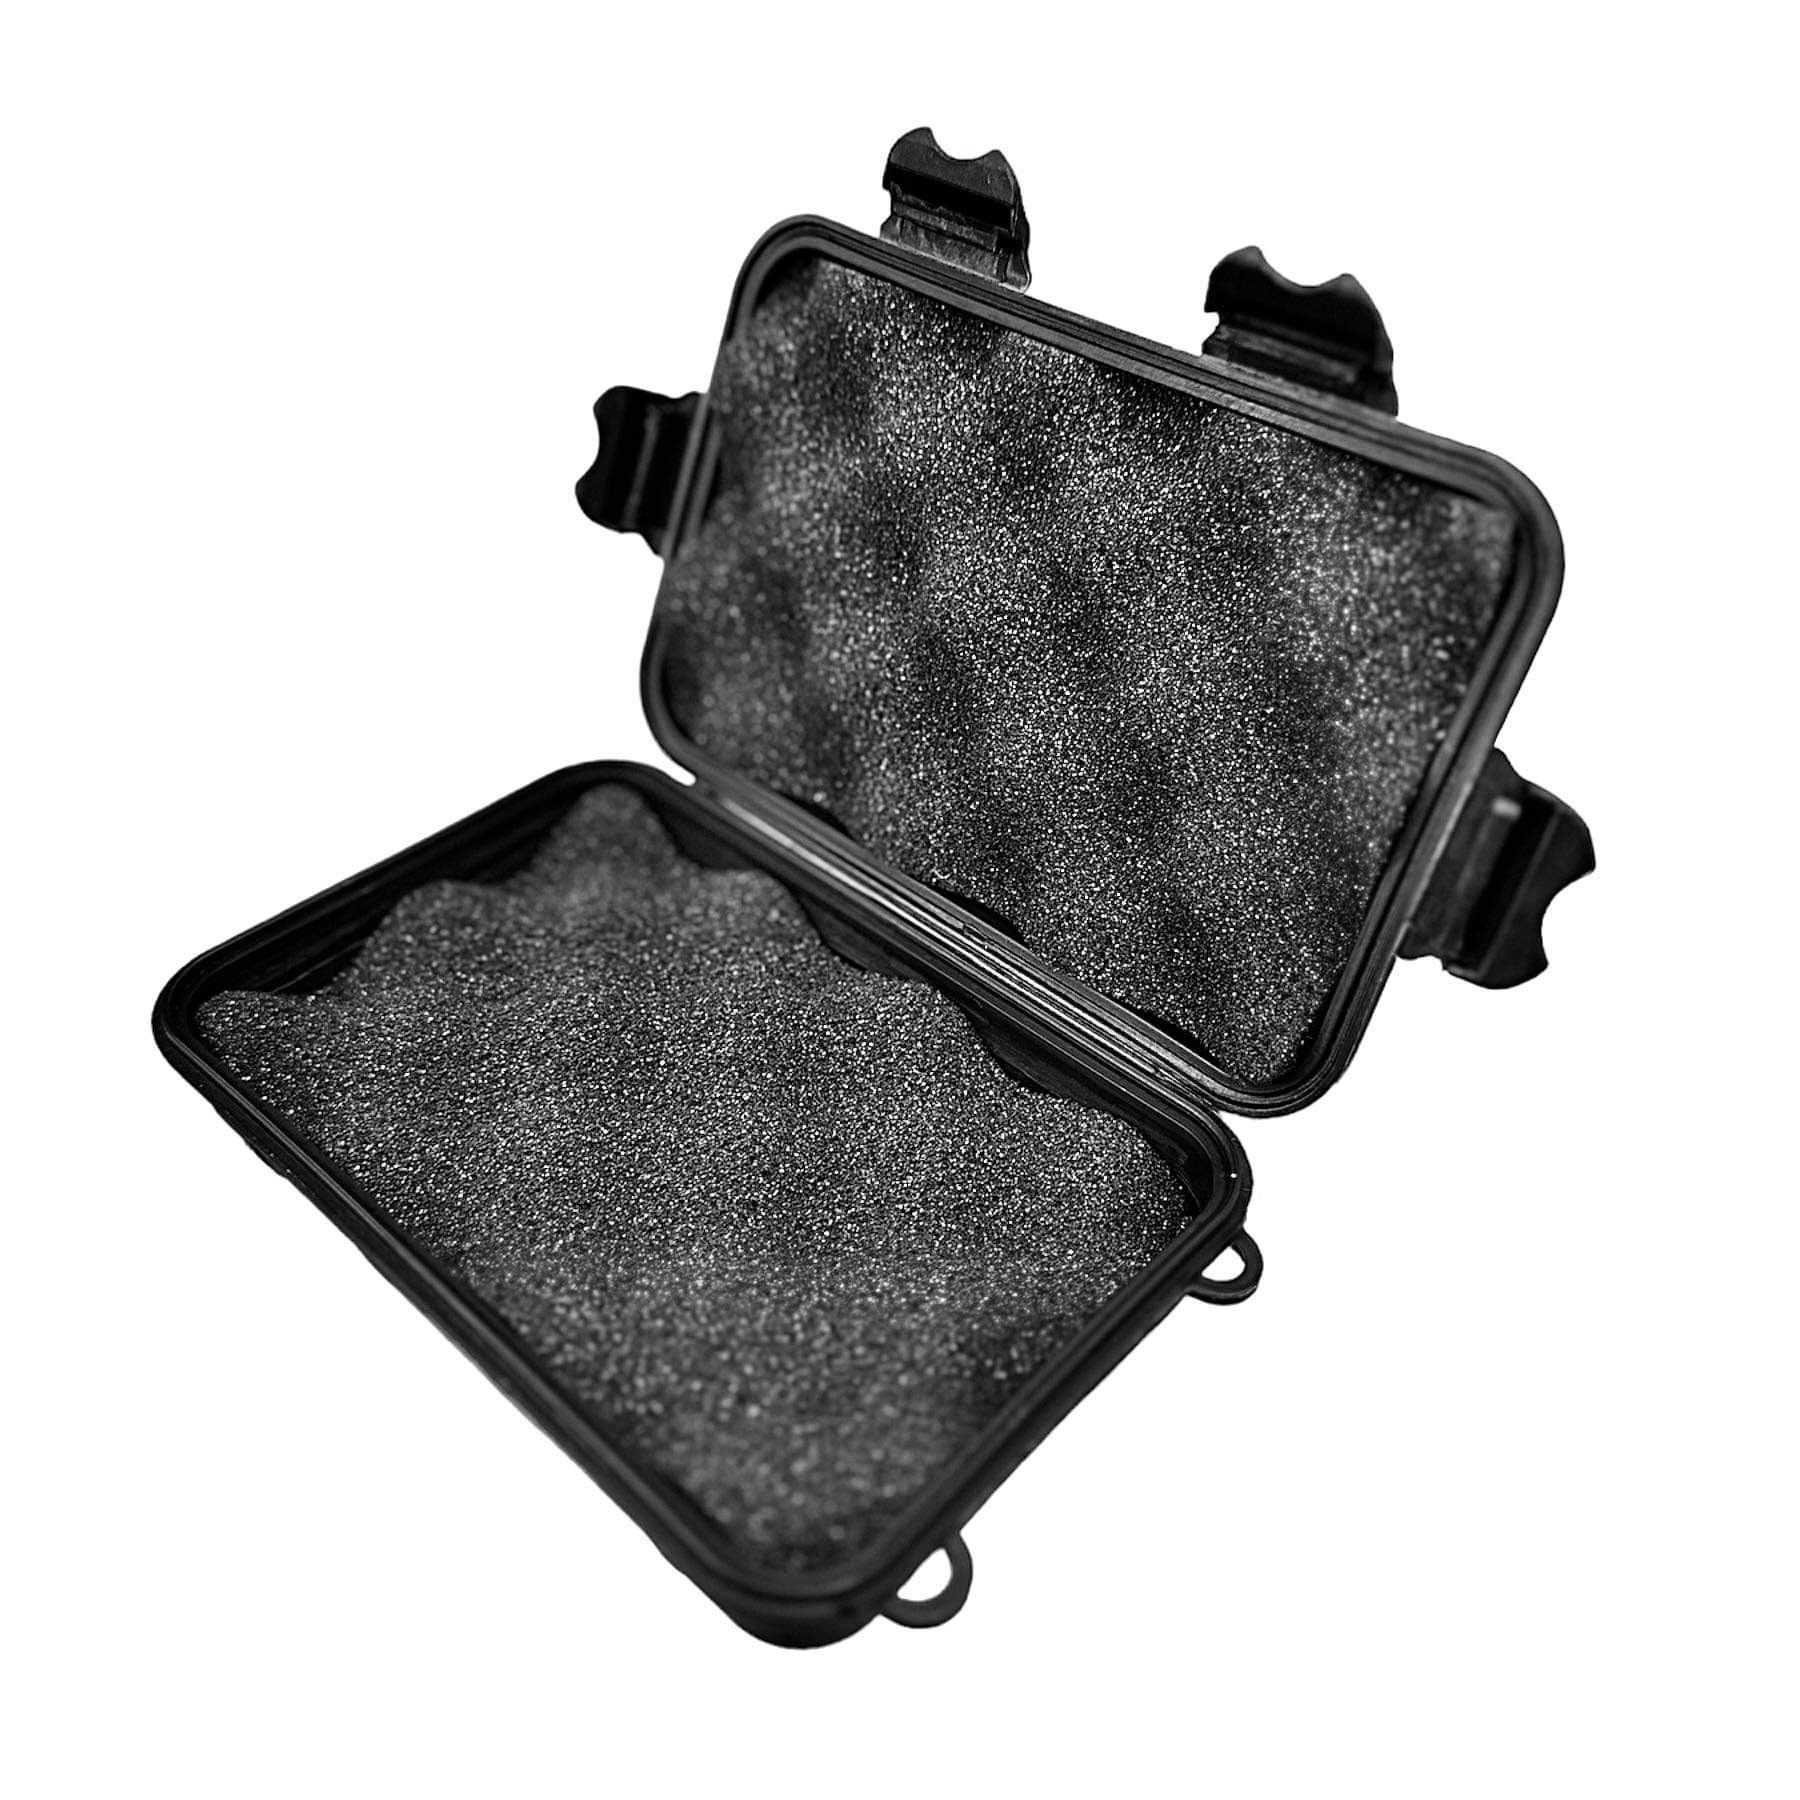 Rugged Crush Resistant Casing (Small)